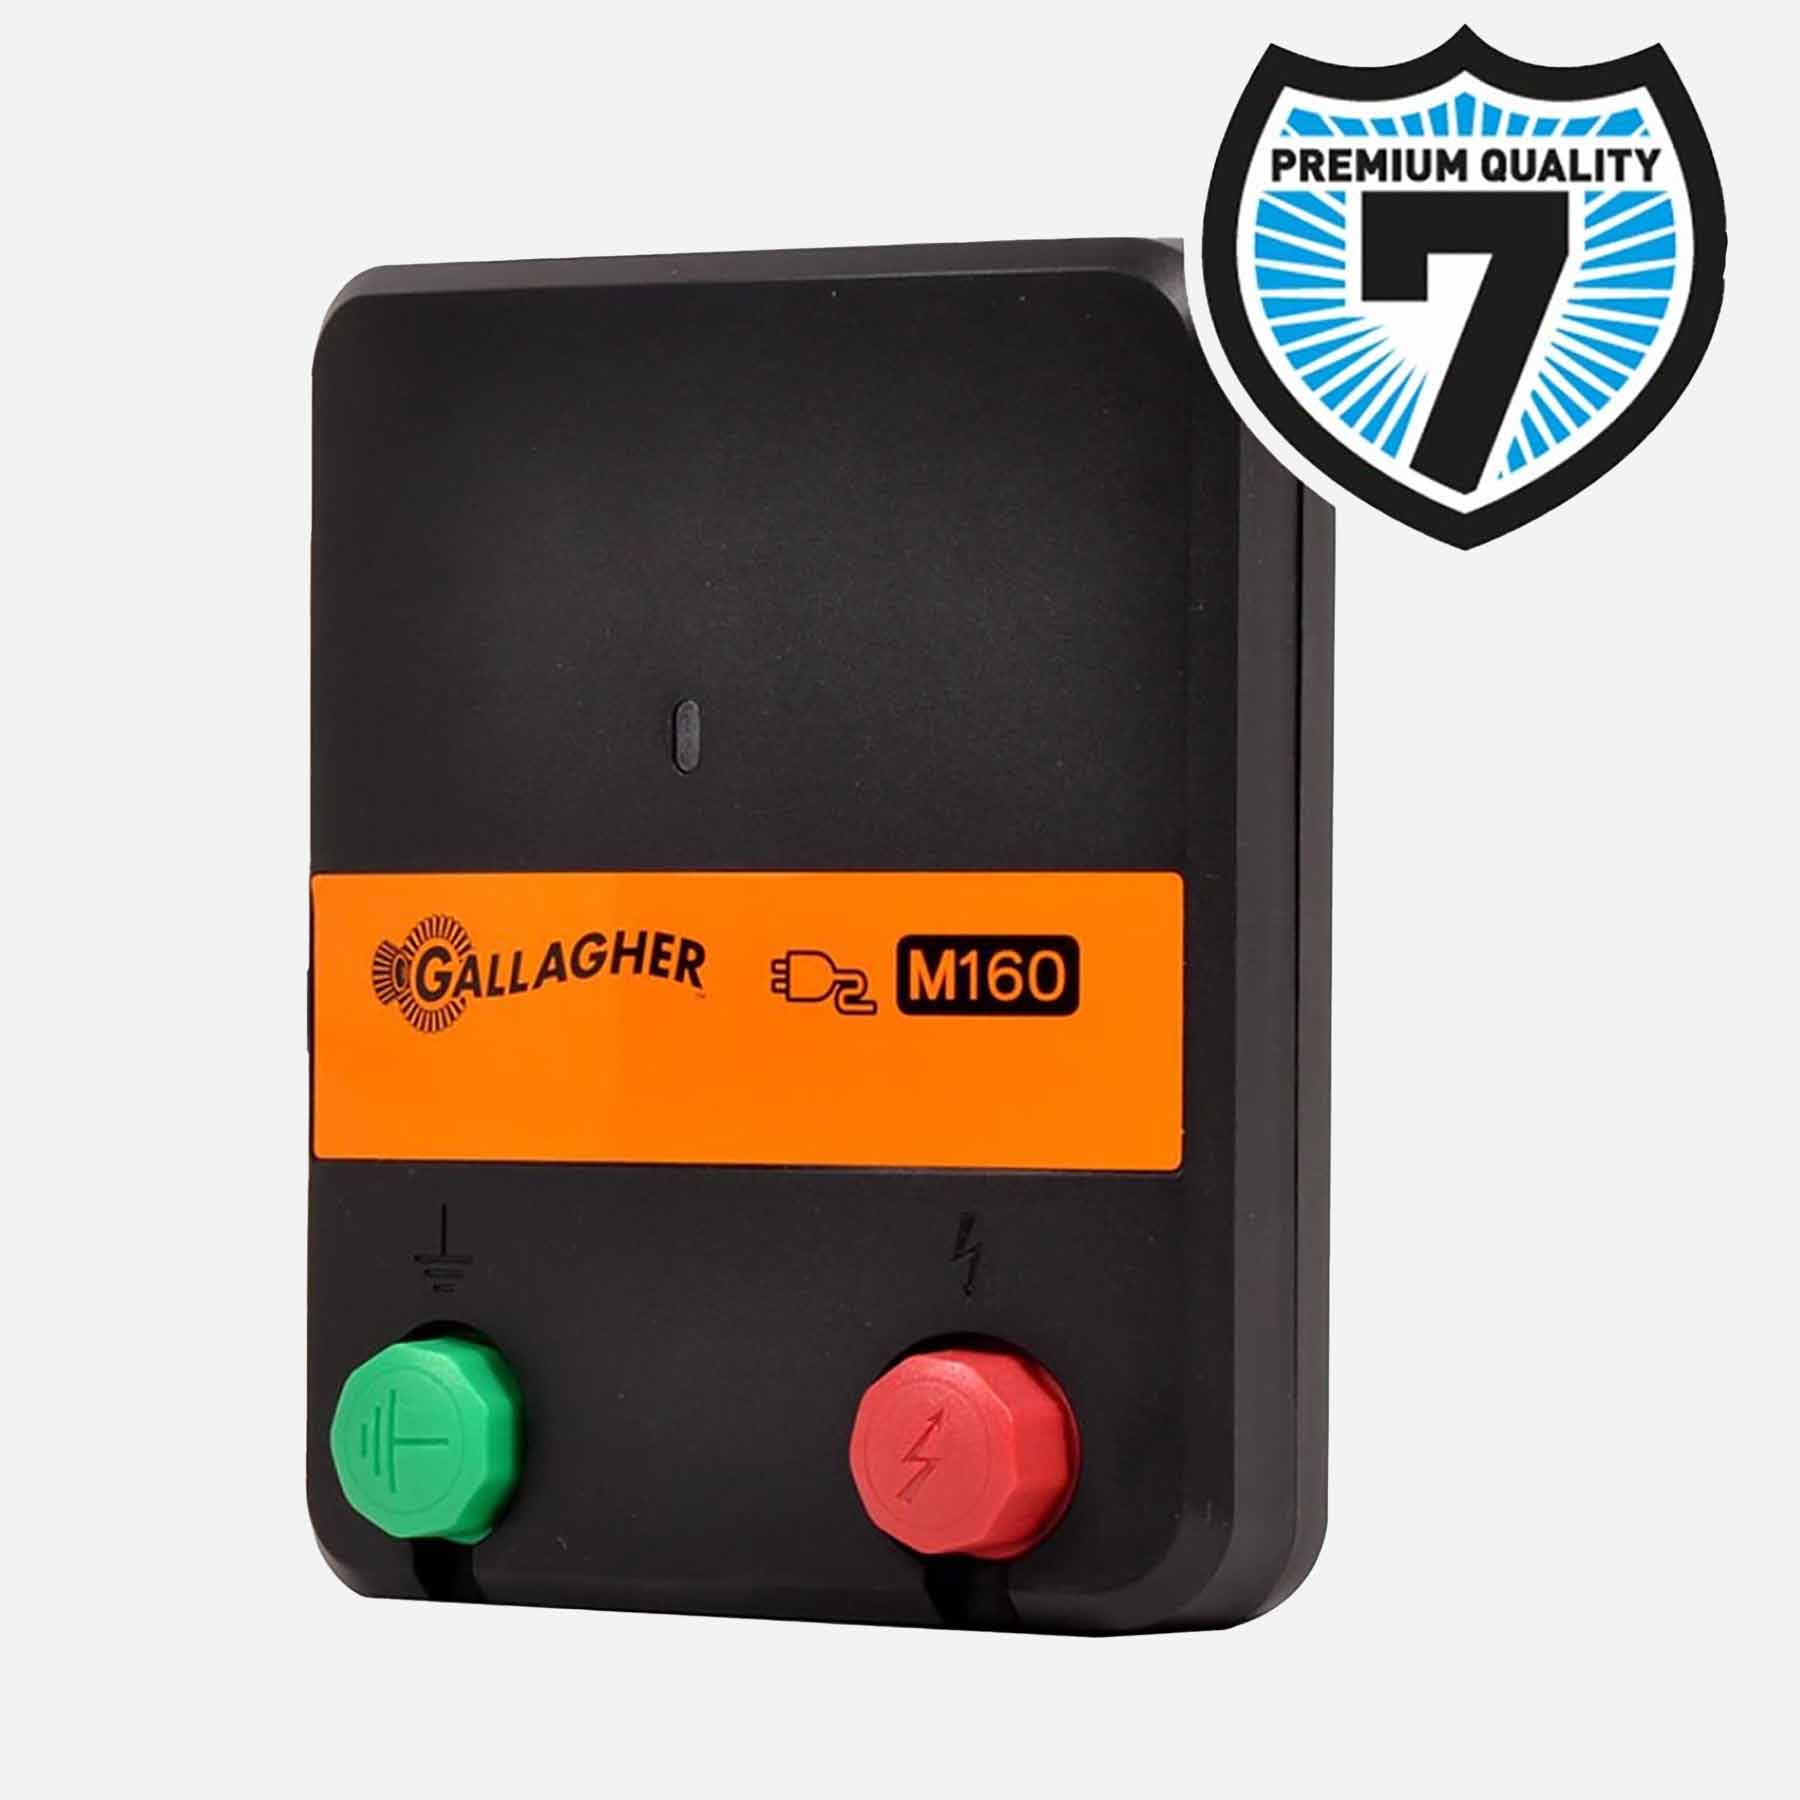 Gallagher Fence Energizer M160 (for mains power)